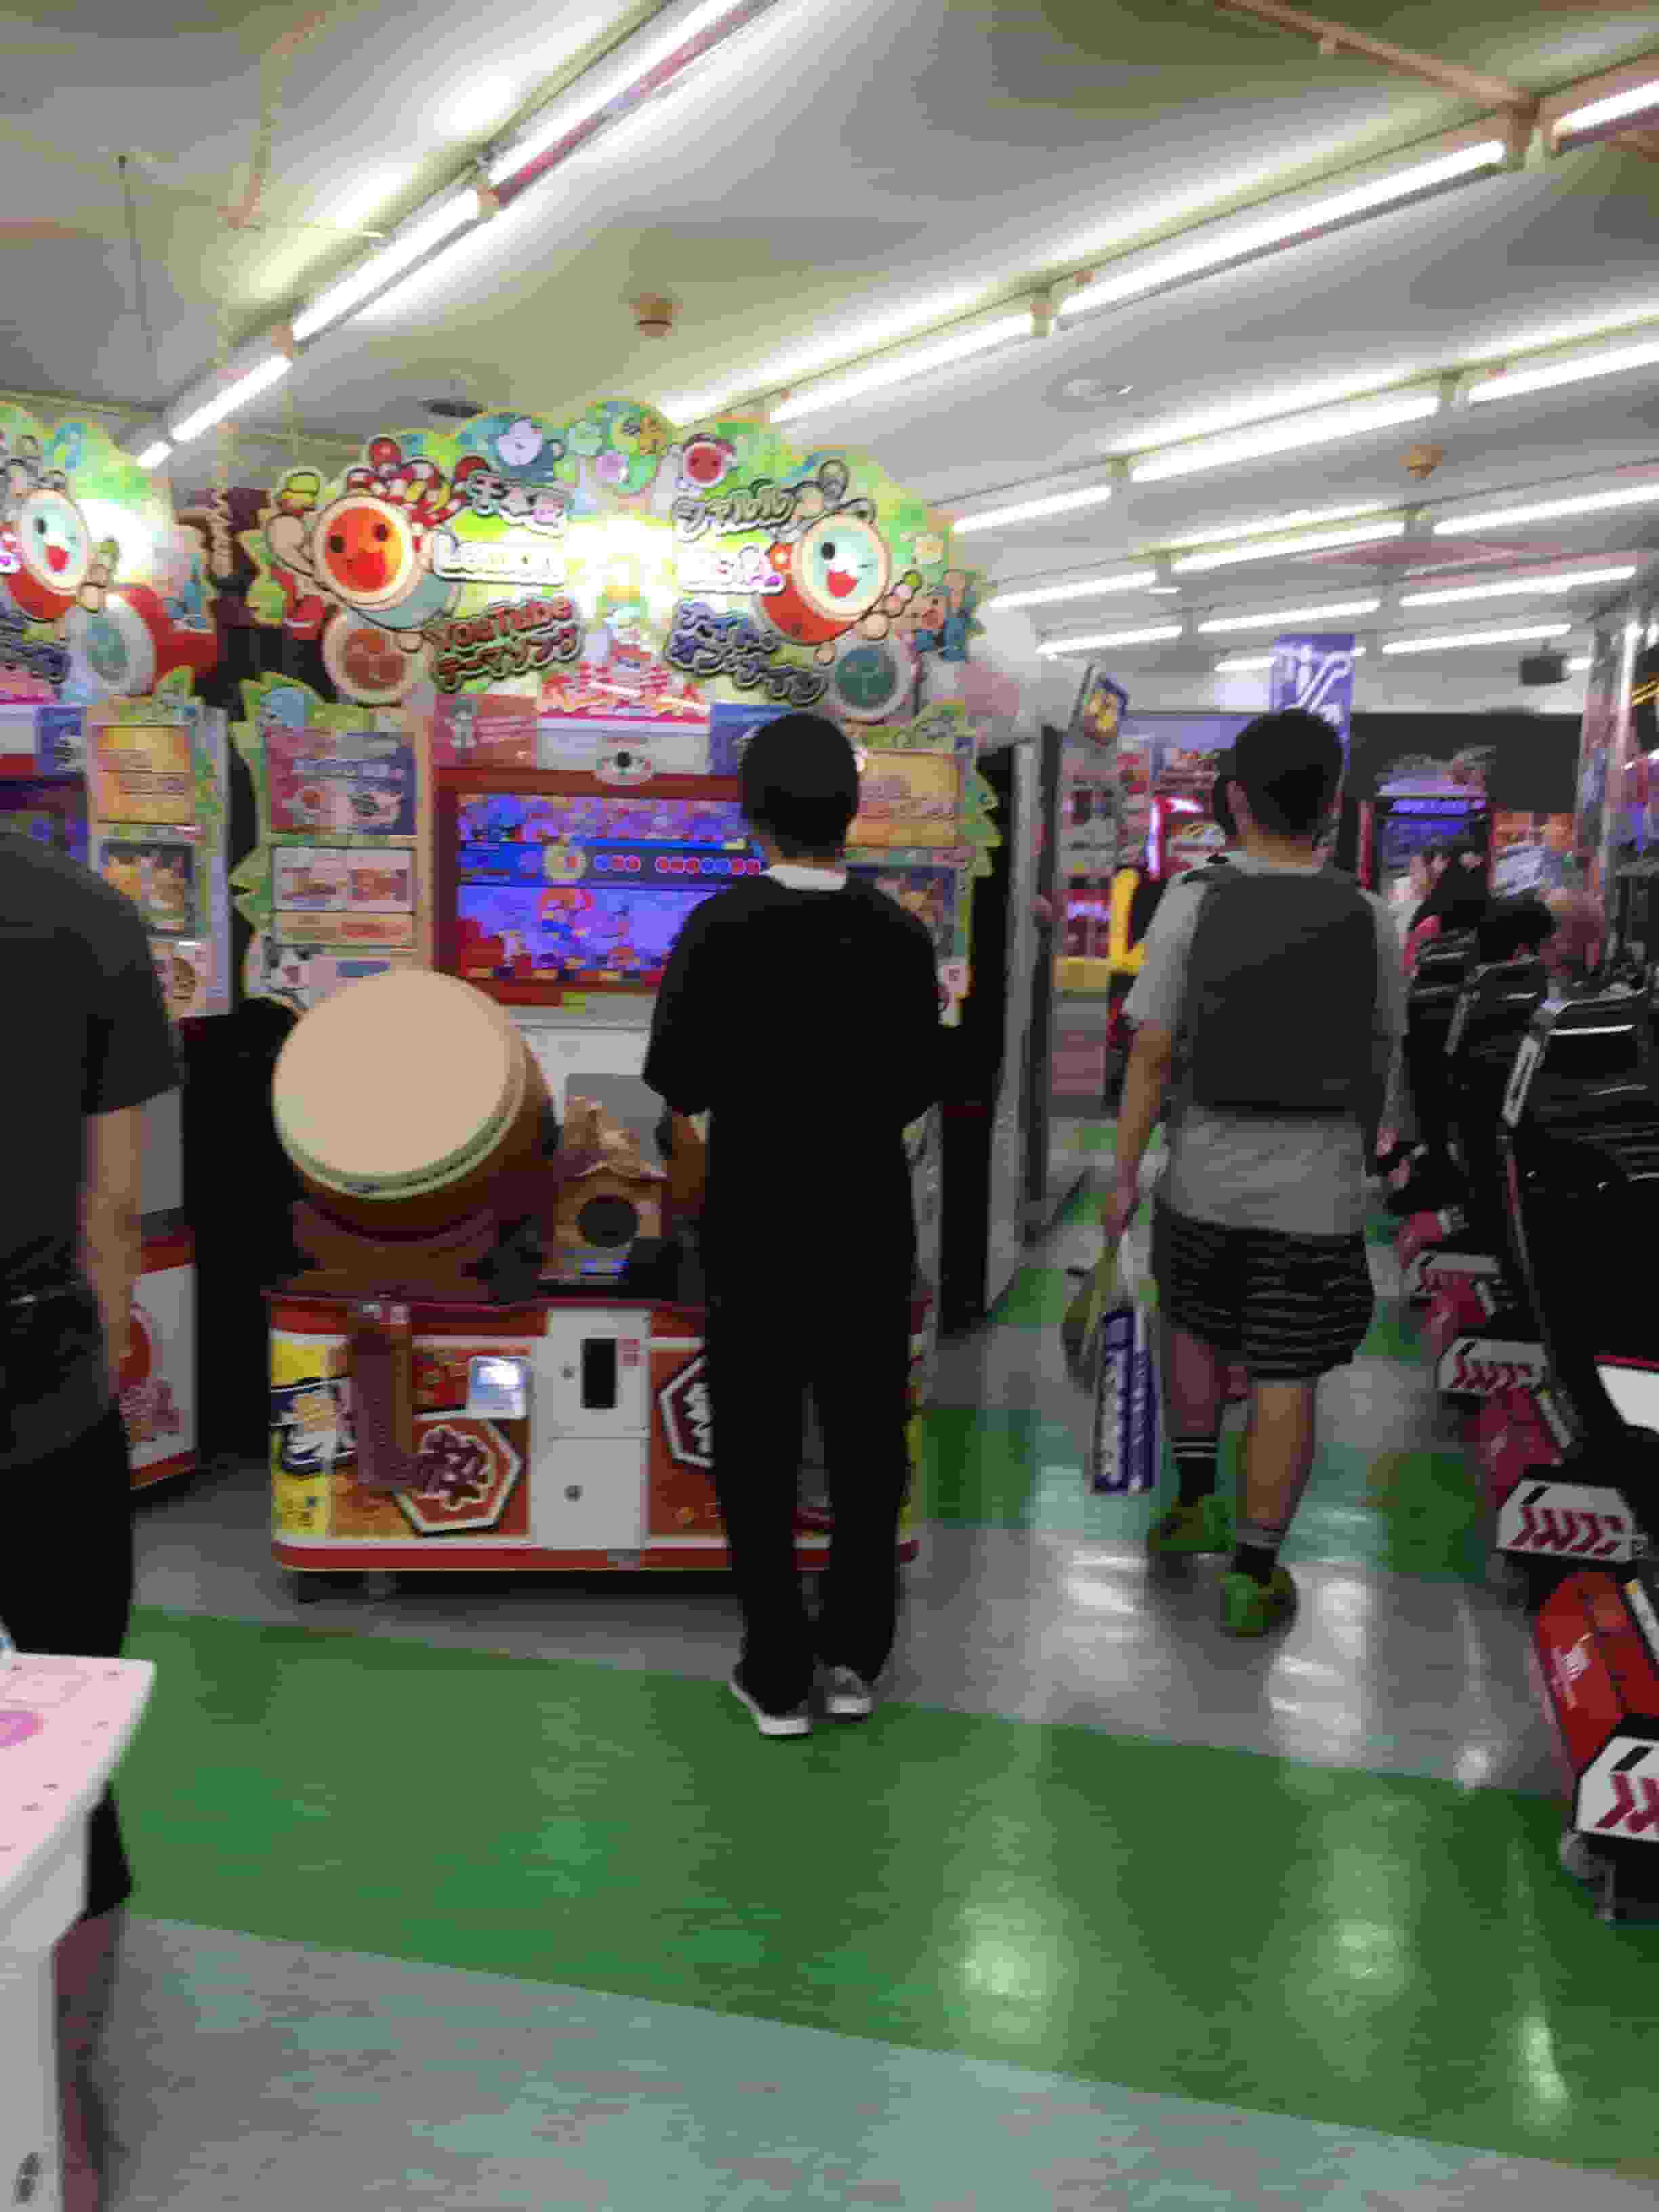 Kill time and zombies: four of Tokyo's most exciting game centres